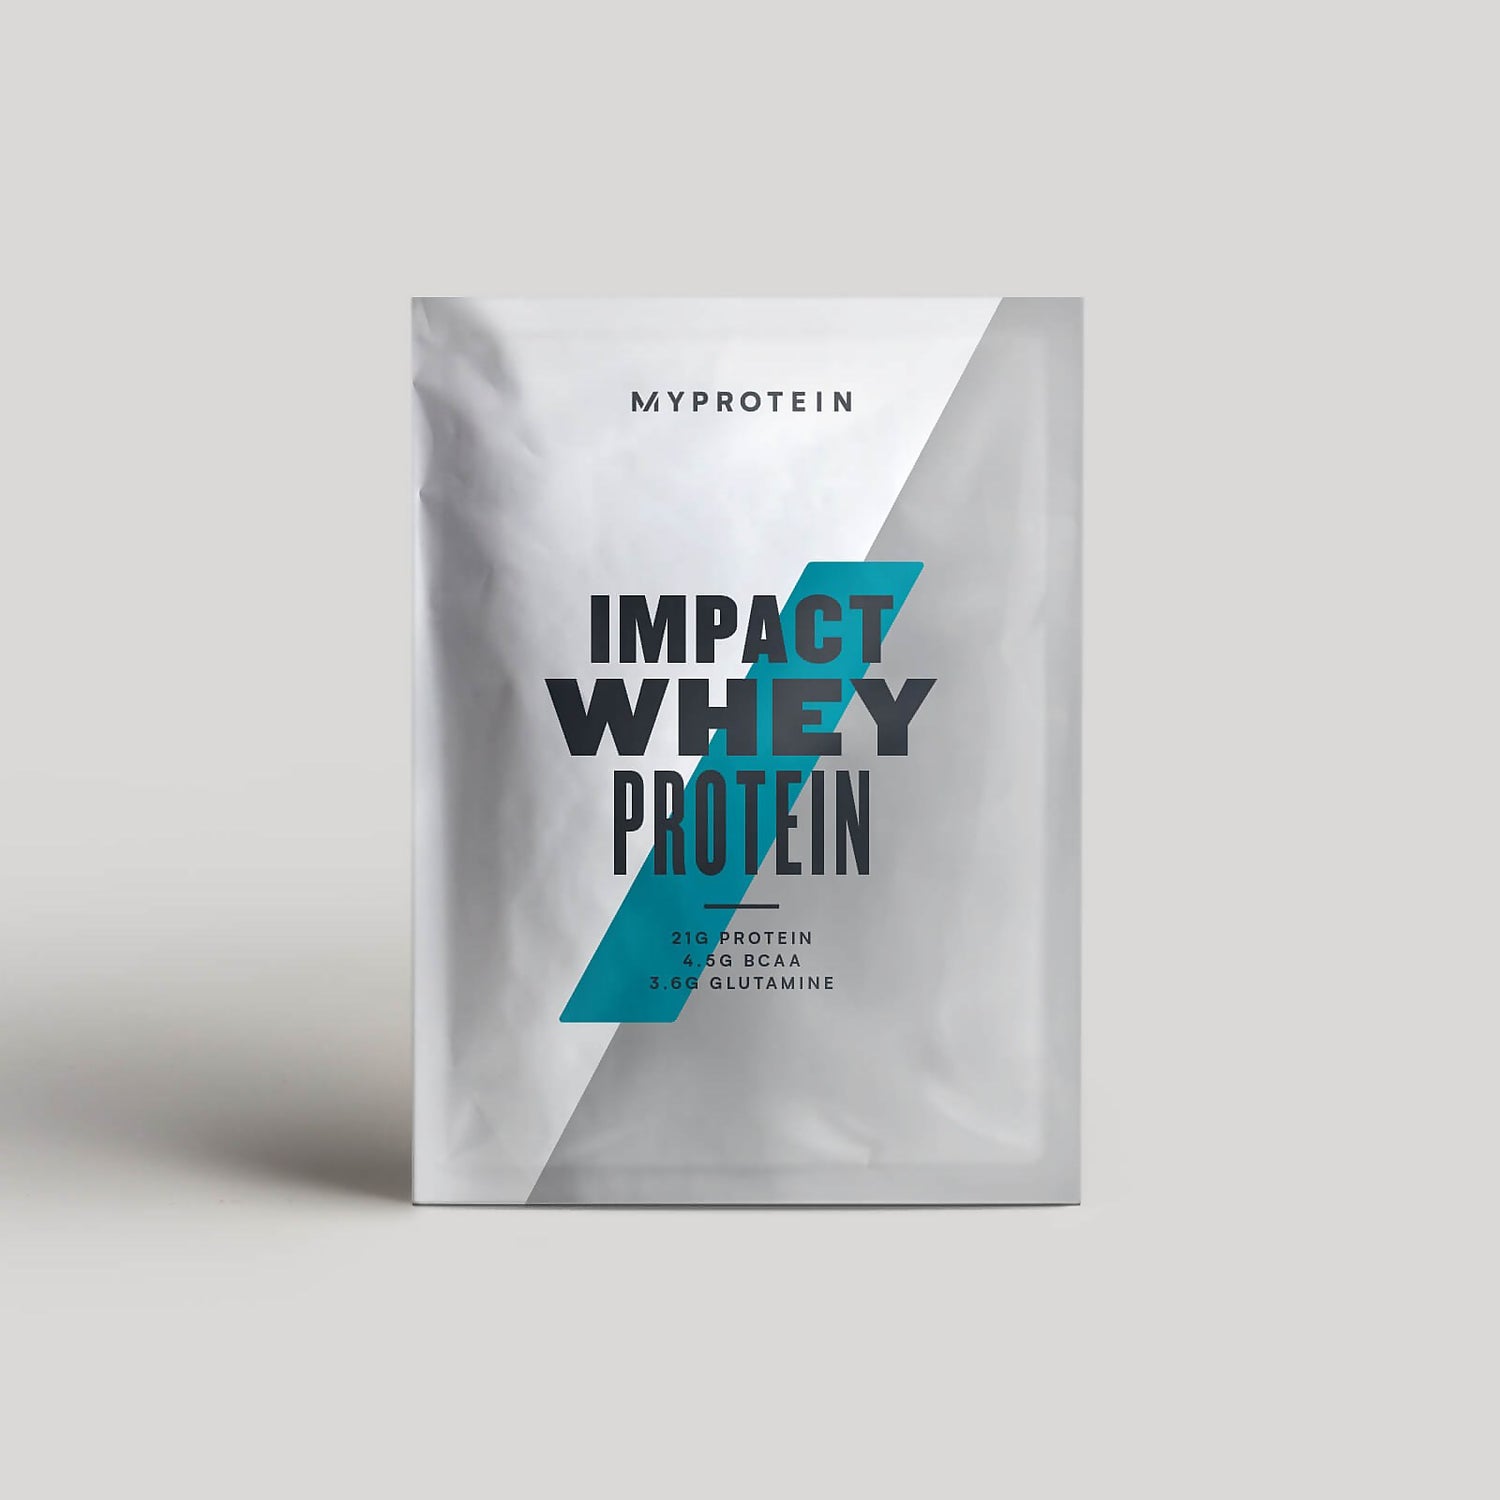 Impact Whey Protein (Sample) - 25g - Chocolate Smooth